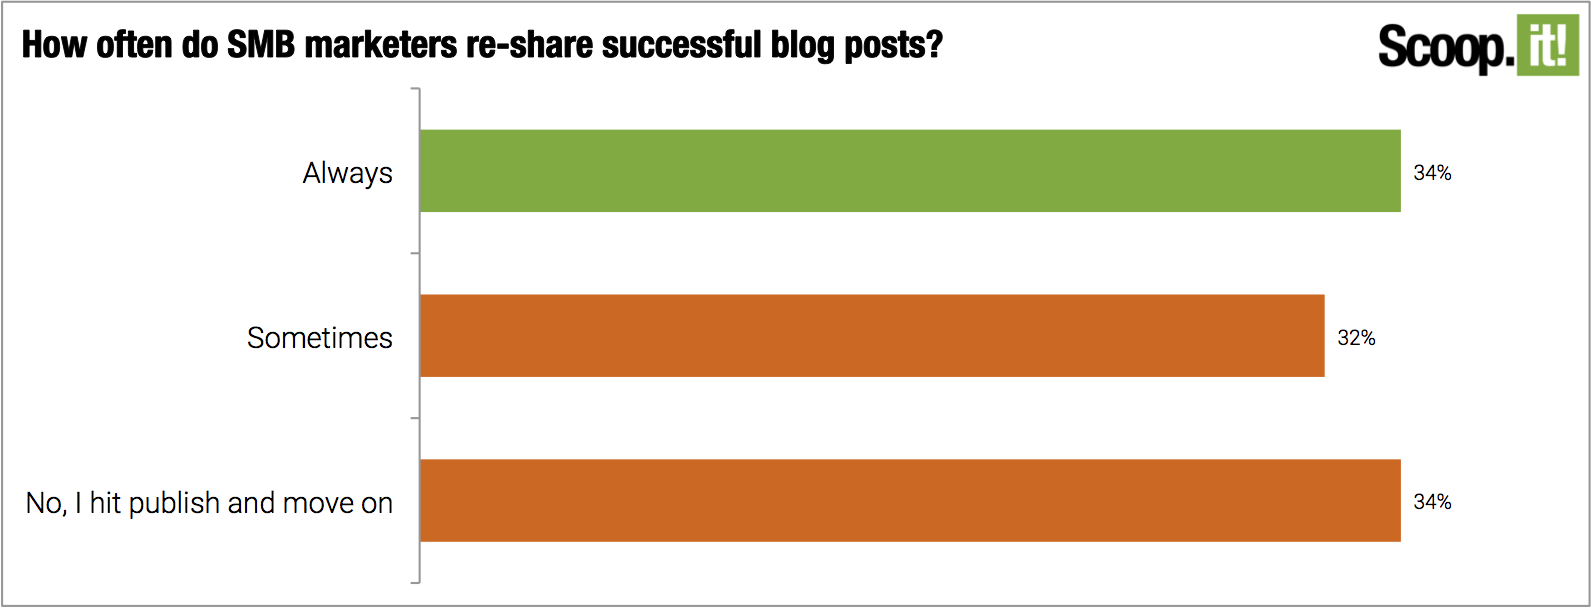 Only about 35%25 of marketers always reshare their blog posts